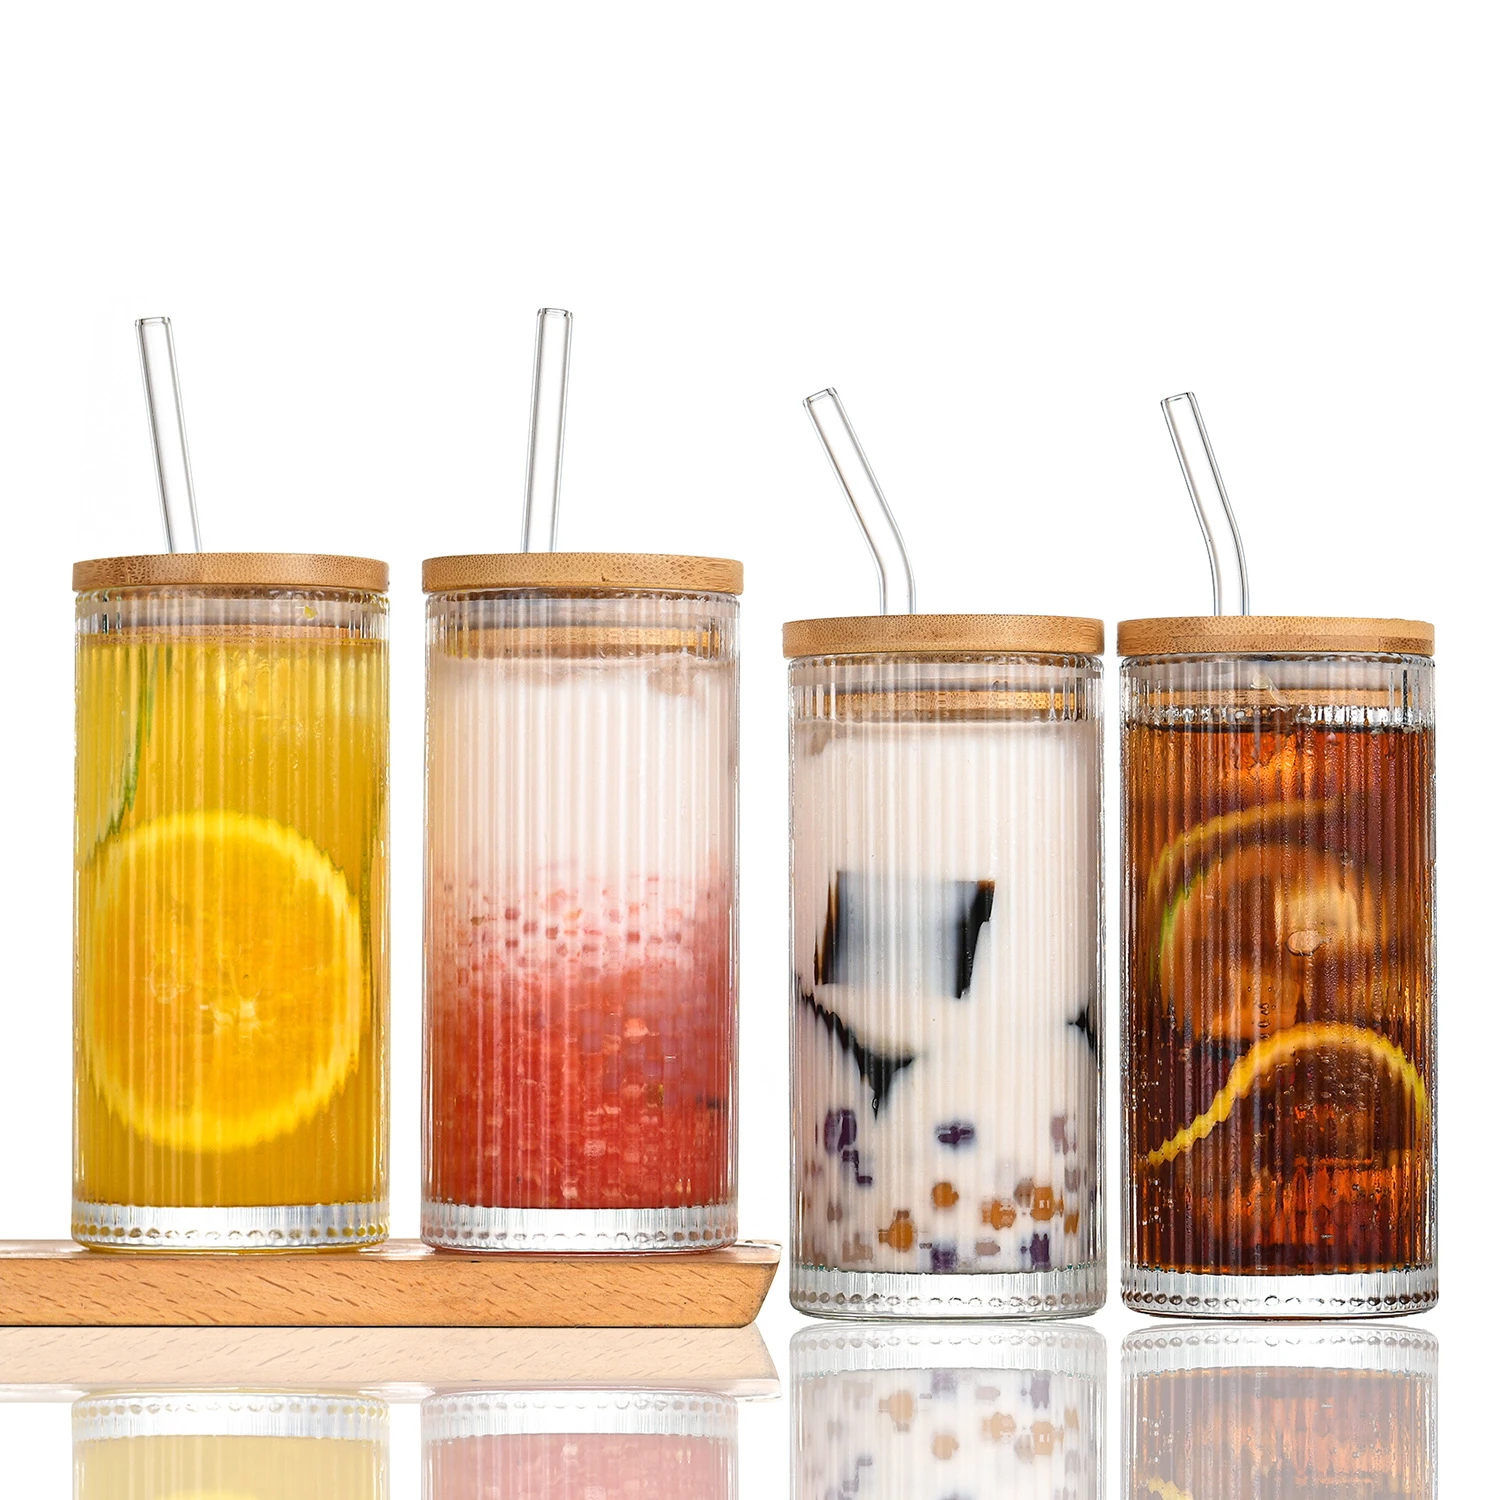 

K02 New 12oz Vertical Design Juice Cup Set Cola Can Glass Coffee Mug Milk Tea Cup Glass With Bamboo Lid And Straw